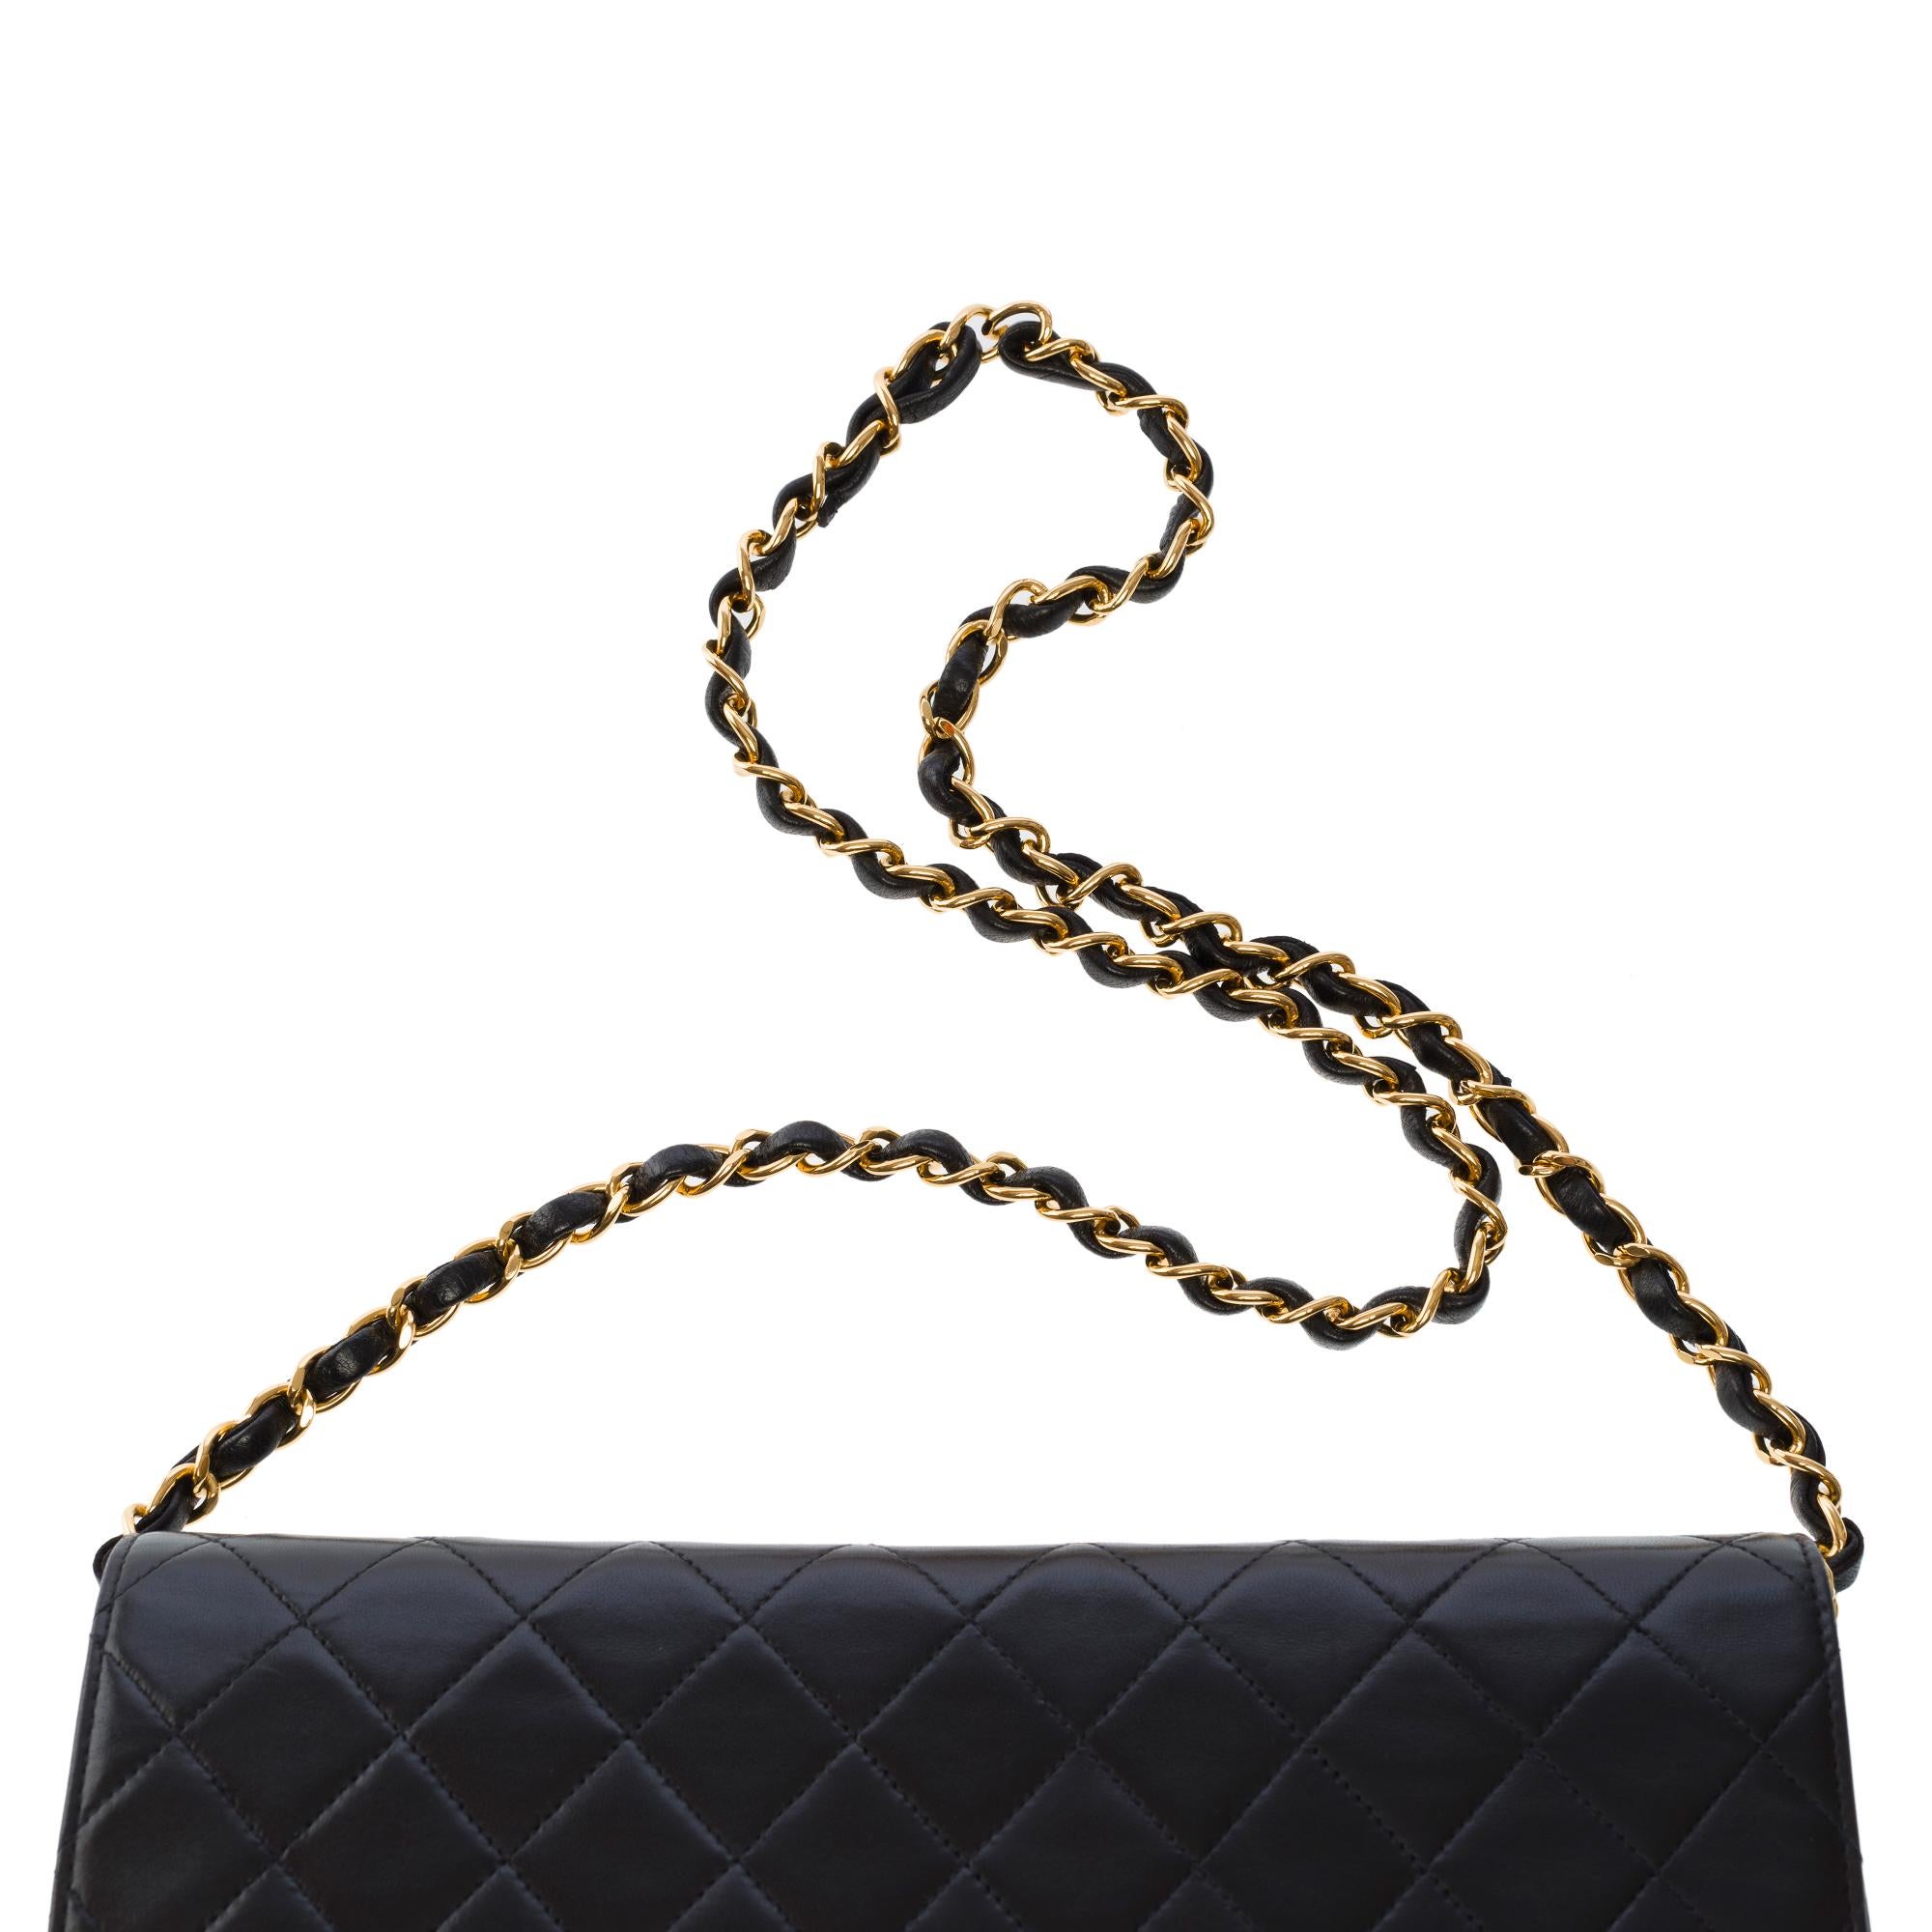 Gorgeous Chanel Classic shoulder flap bag in black quilted lambskin leather, GHW 5